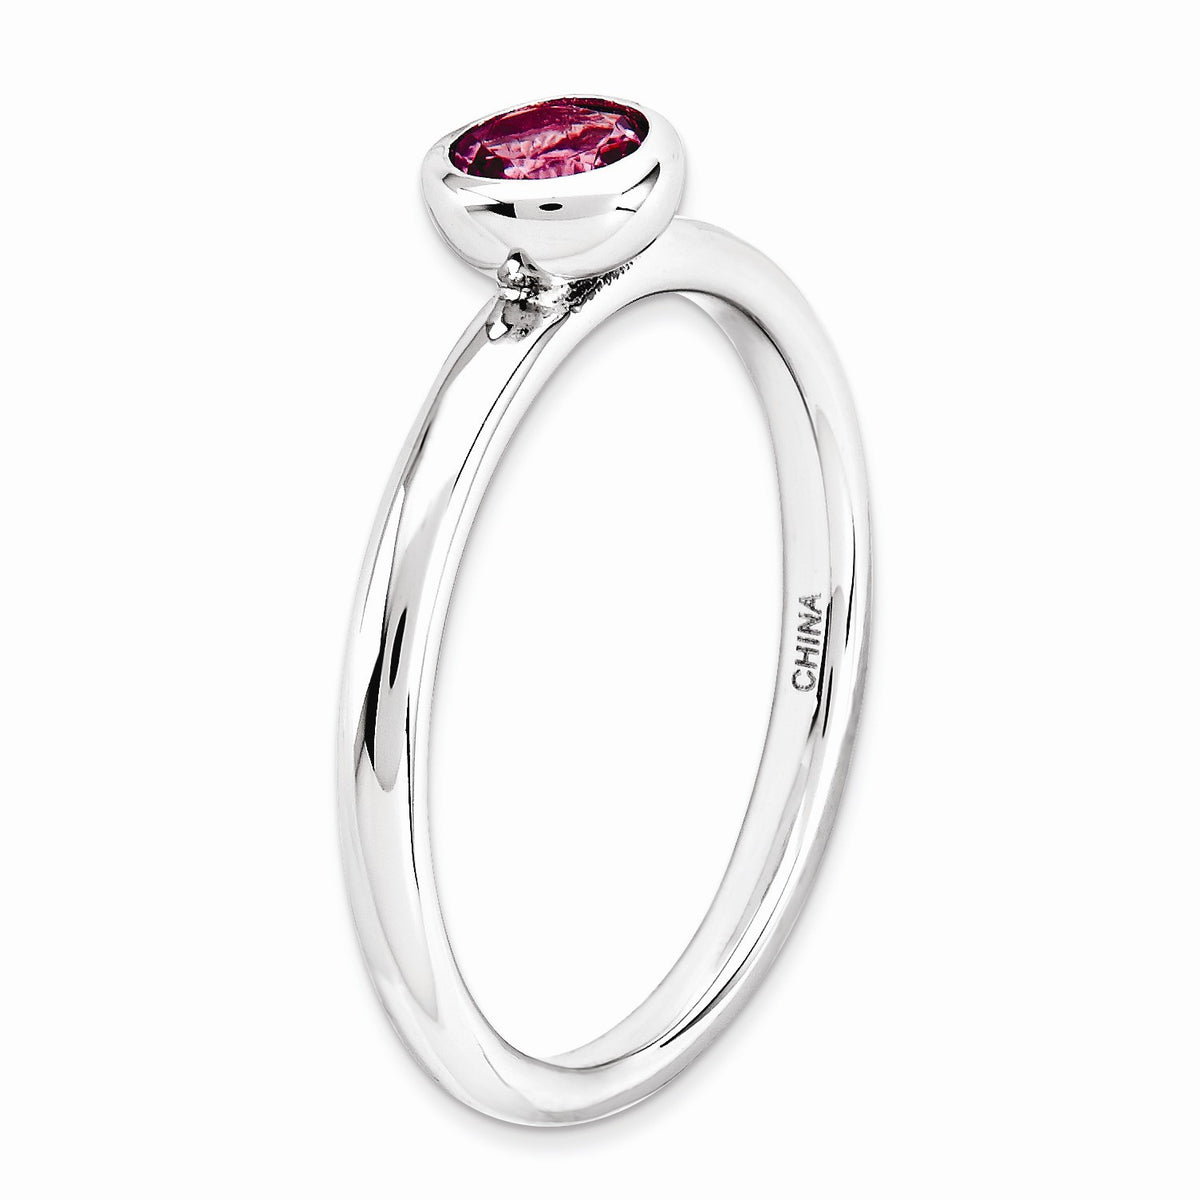 Alternate view of the Stackable Low Profile 5mm Pink Tourmaline Silver Ring by The Black Bow Jewelry Co.